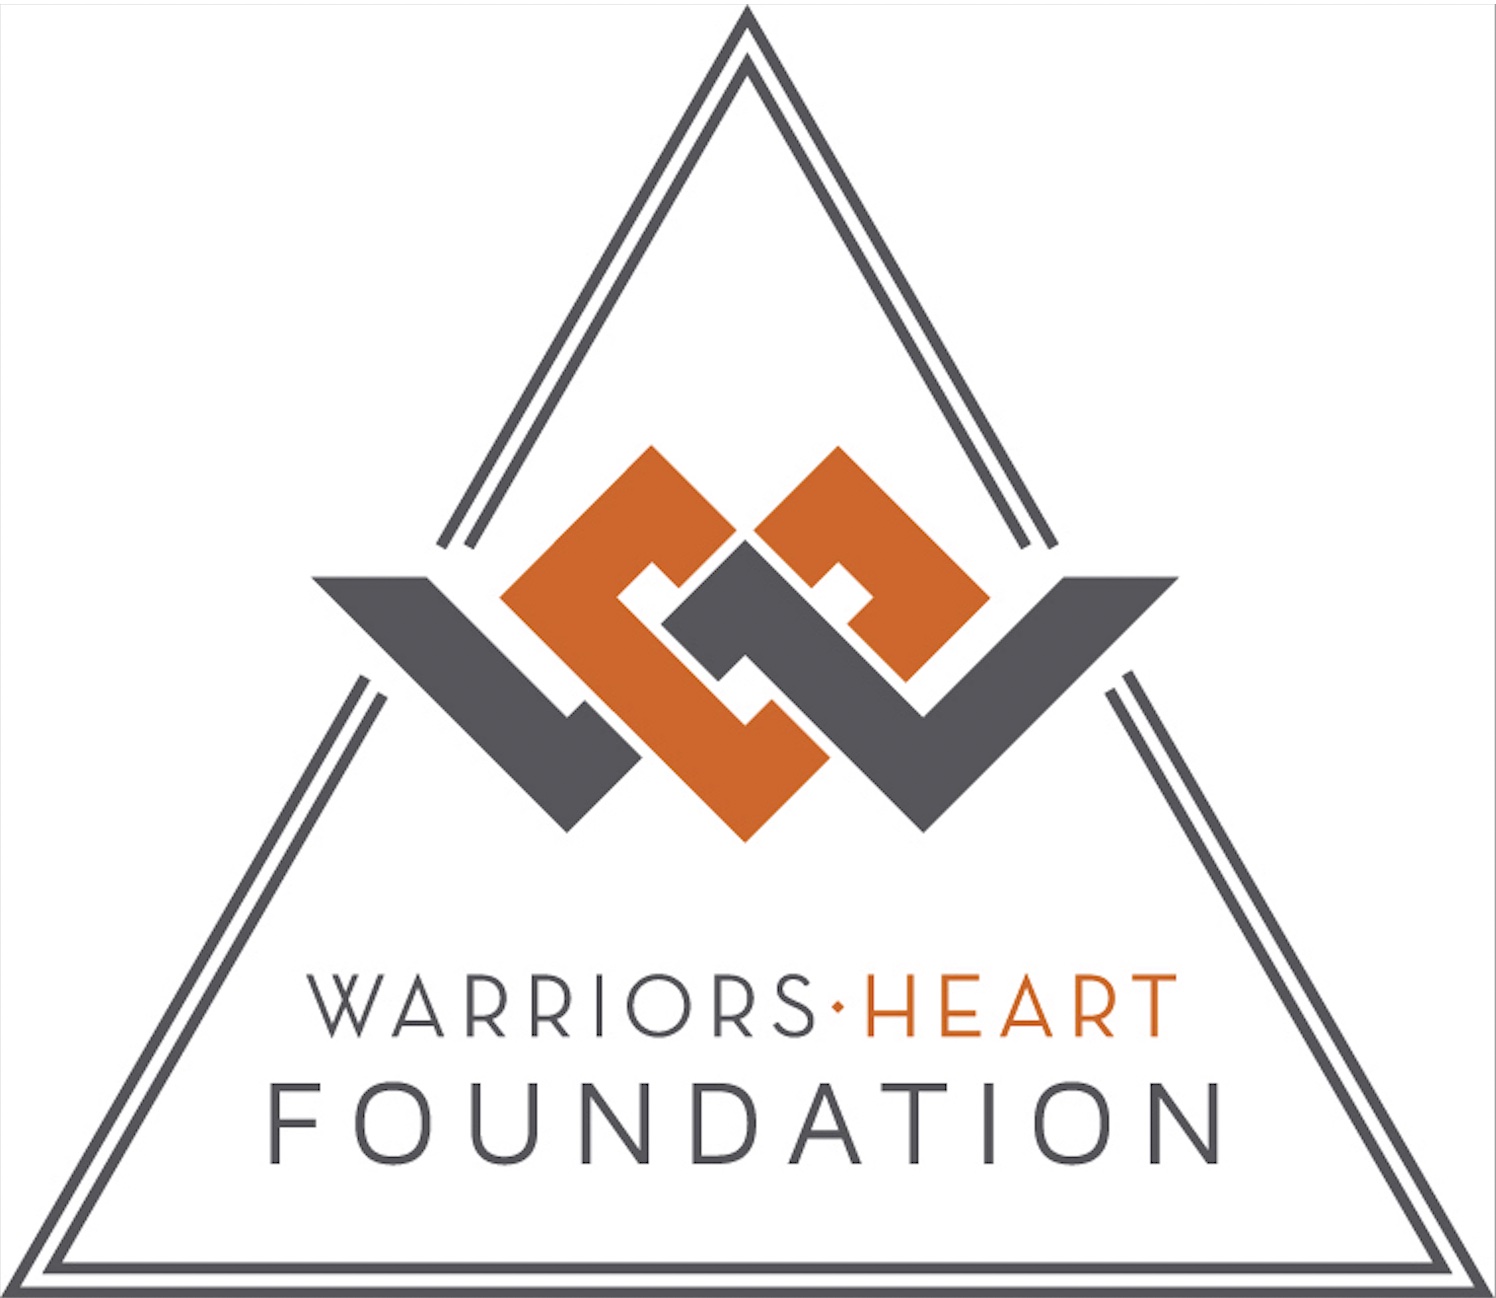 Warriors Heart Foundation is a 501 (c)(3) that accepts deductible donations to help heal our frontline protectors (active-duty military, veterans, first responders and EMTs/Paramedics) heal with peers